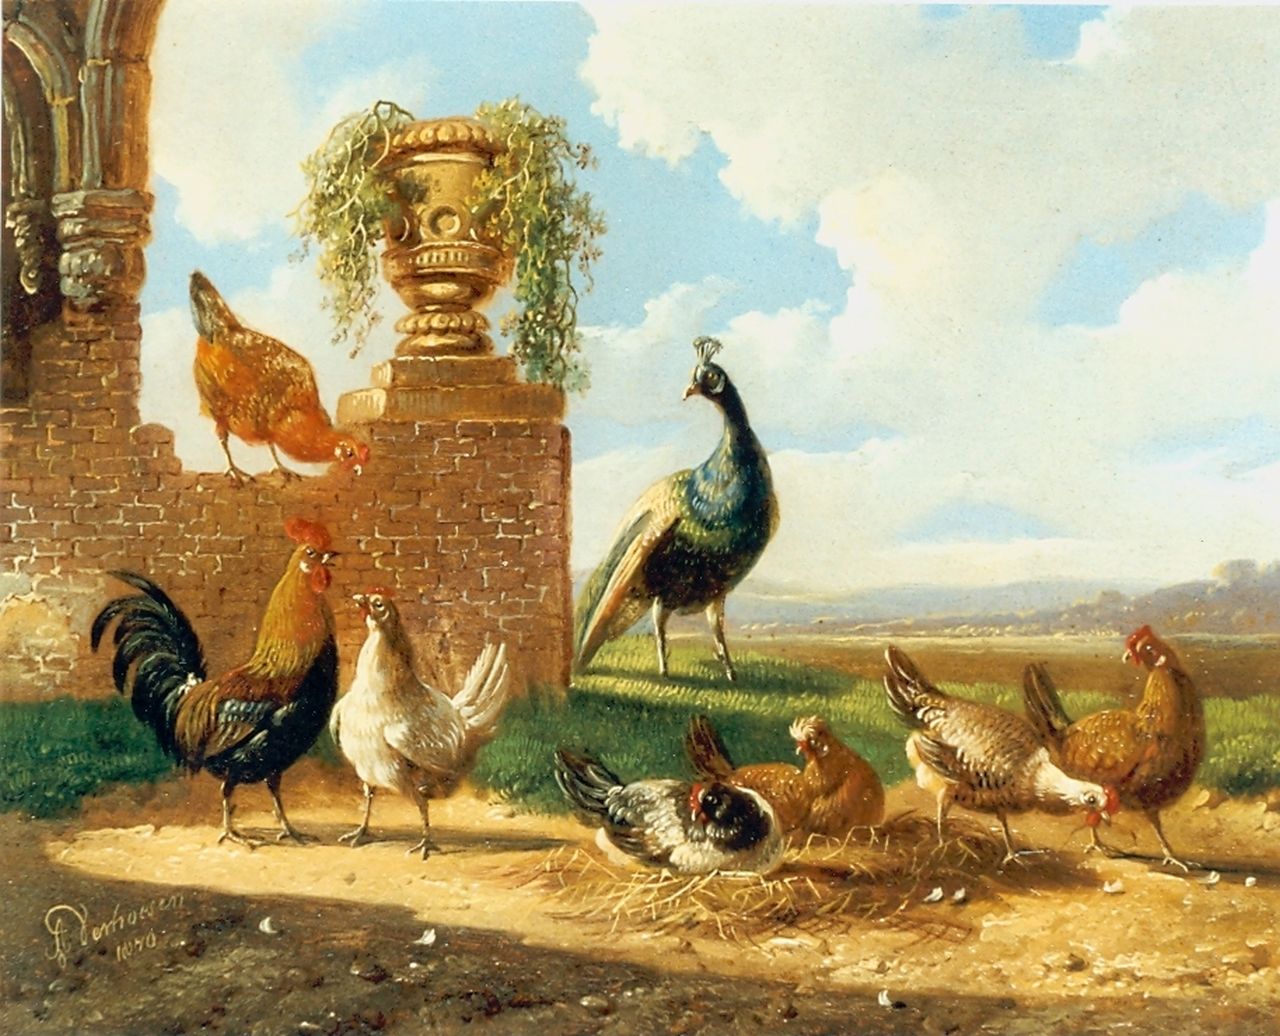 Verhoesen A.  | Albertus Verhoesen, Chickens and a  peacock in a classical landscape, Öl auf Holz 13,5 x 17,2 cm, signed l.l. und dated 1870